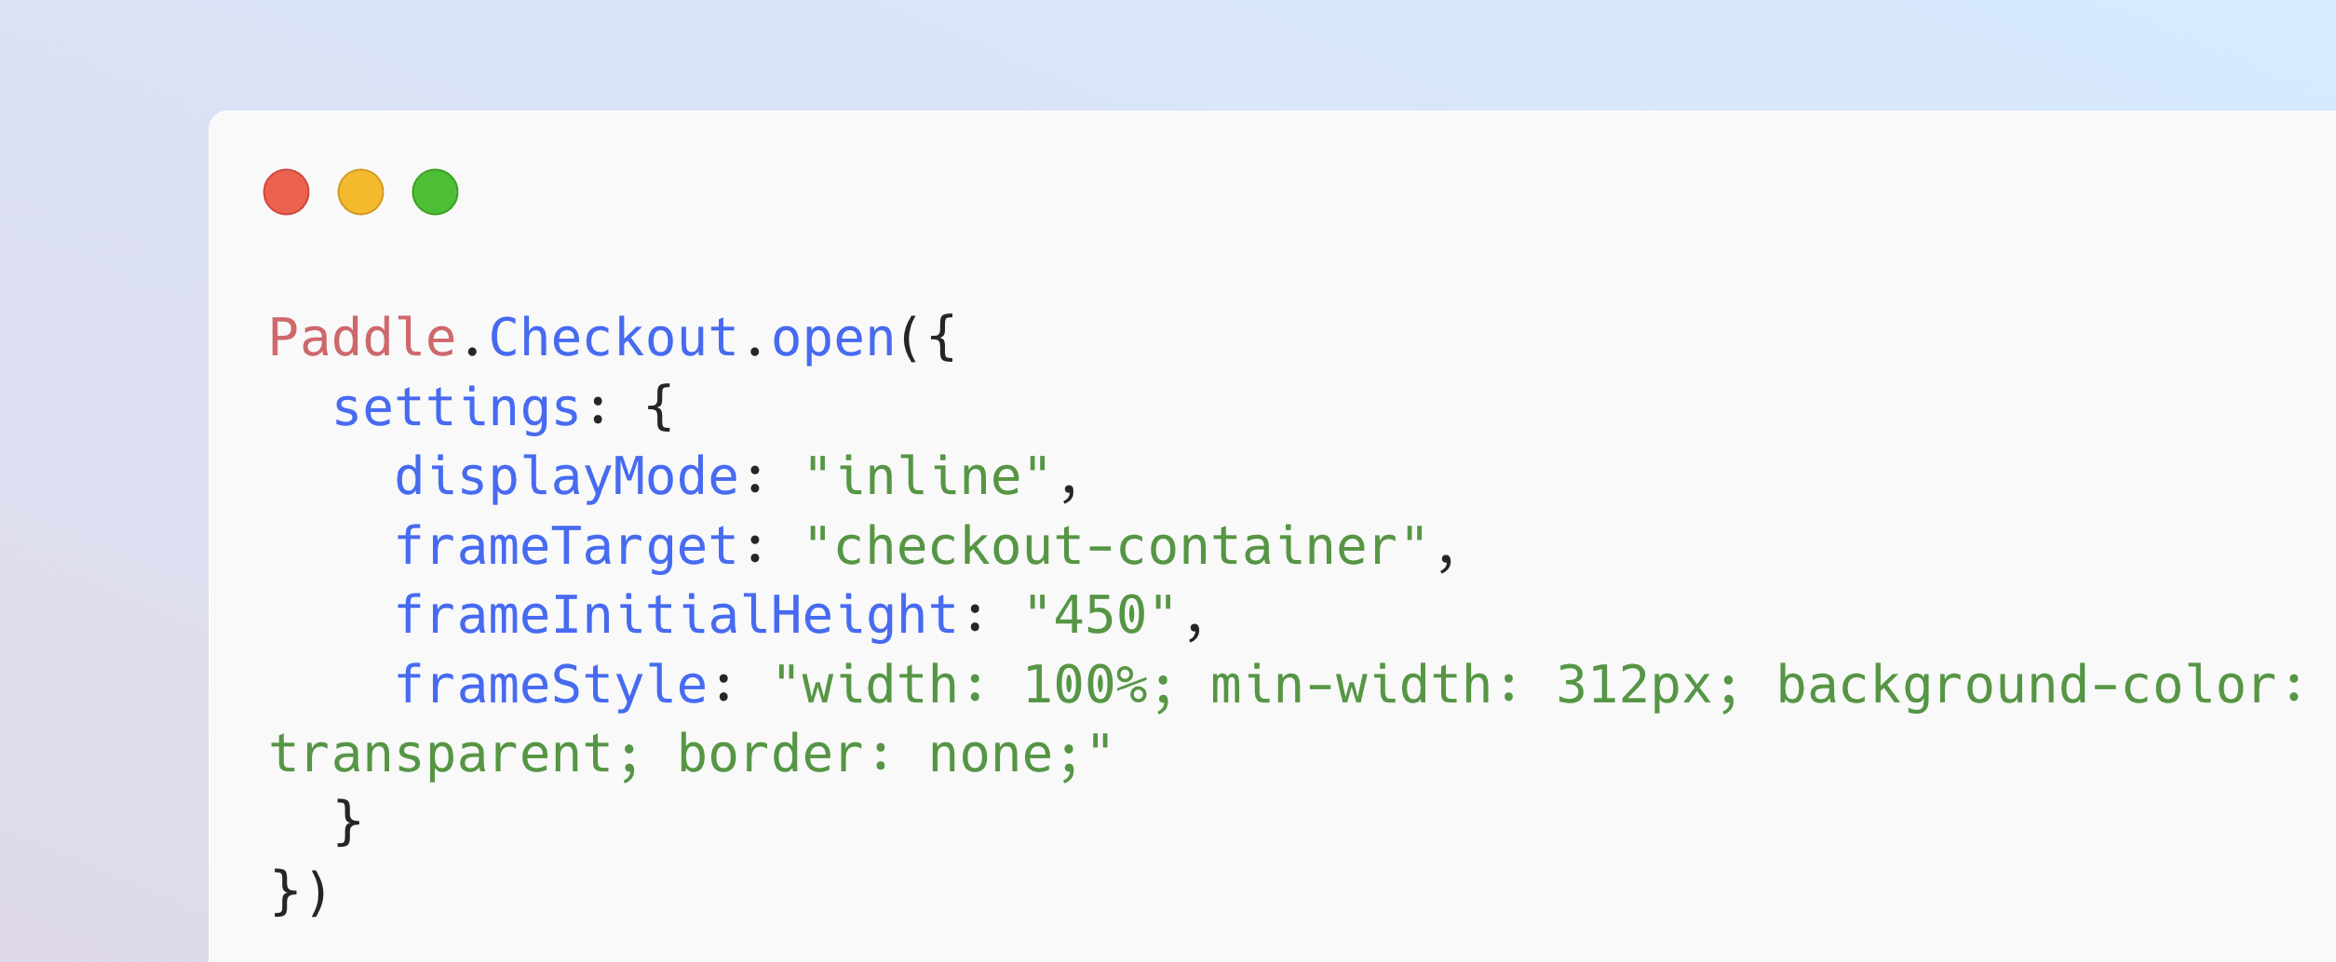 Code illustration showing an open checkout function with settings. It's cut off, so you can't make out the full code.